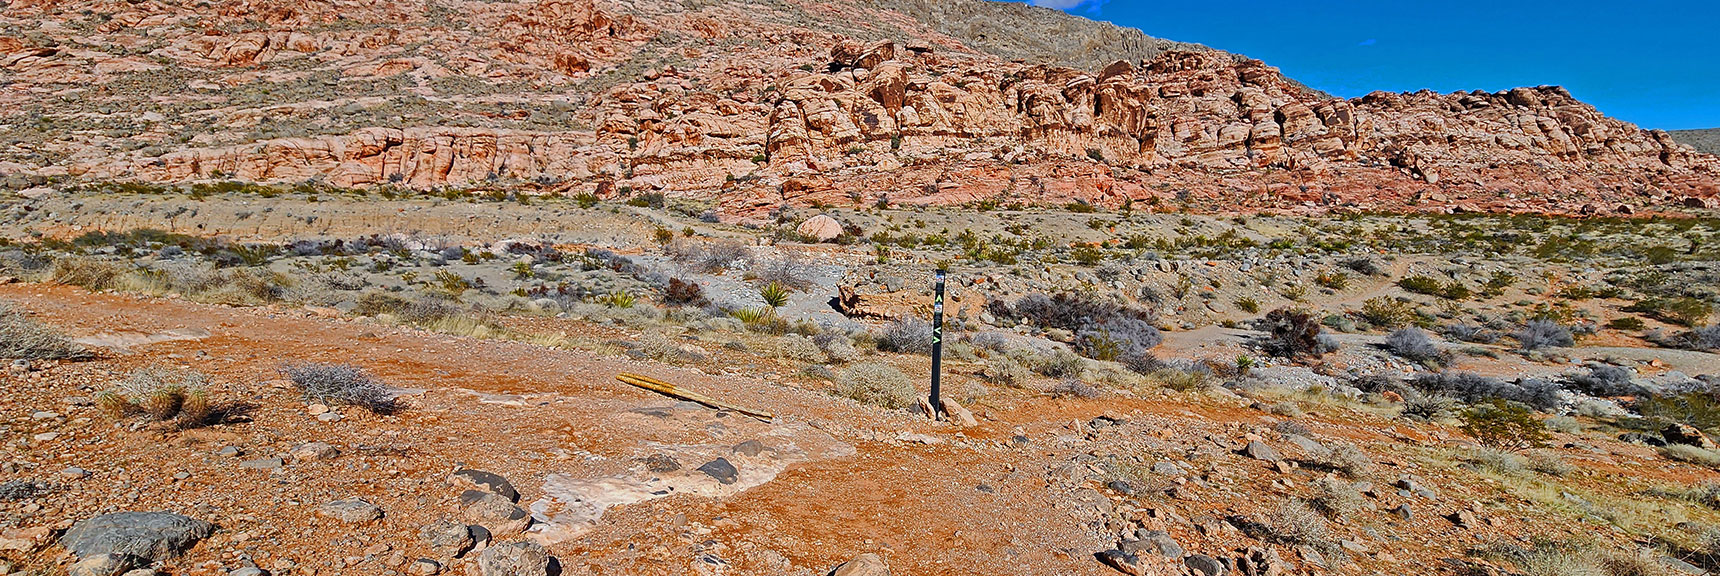 Leave Kraft Mt. Loop at Southeast Base of Mountain, Cross Gateway Canyon, Continue East | Calico Basin Daily Workout Trails | Calico Basin, Nevada